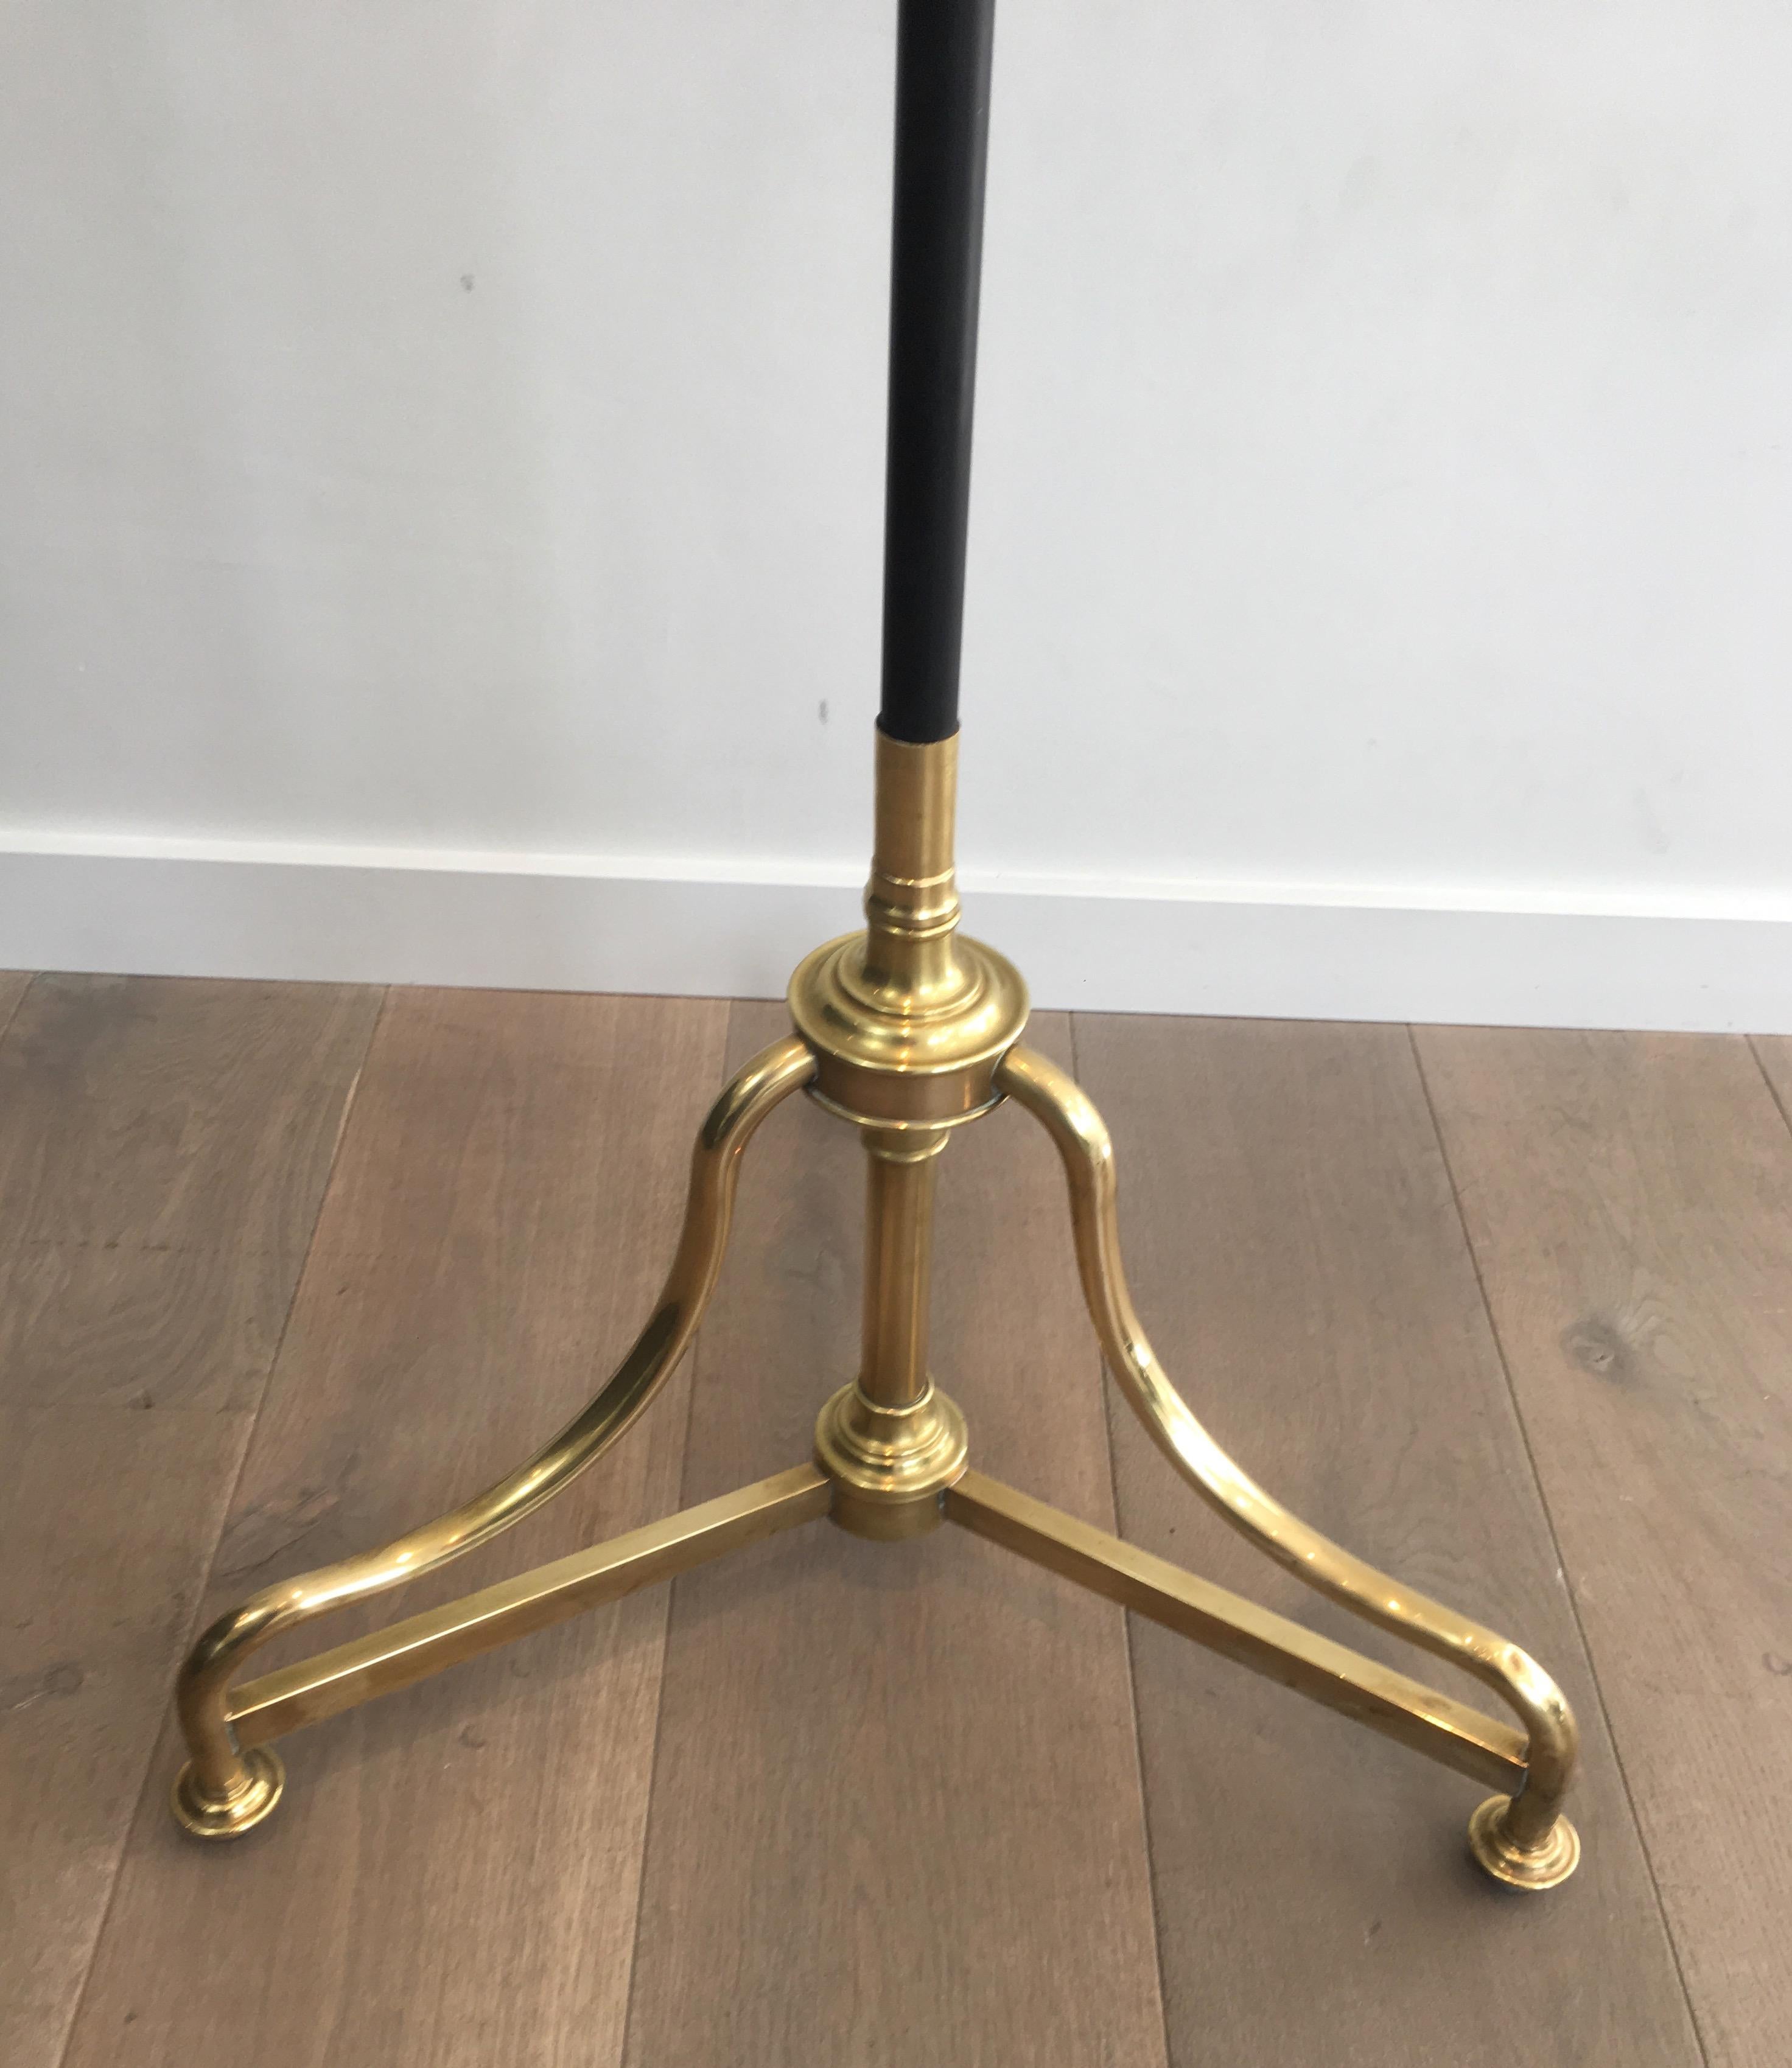 Unusual Tall Black Lacquered and Brass Coat and Hat Rack, French, circa 1900 For Sale 2